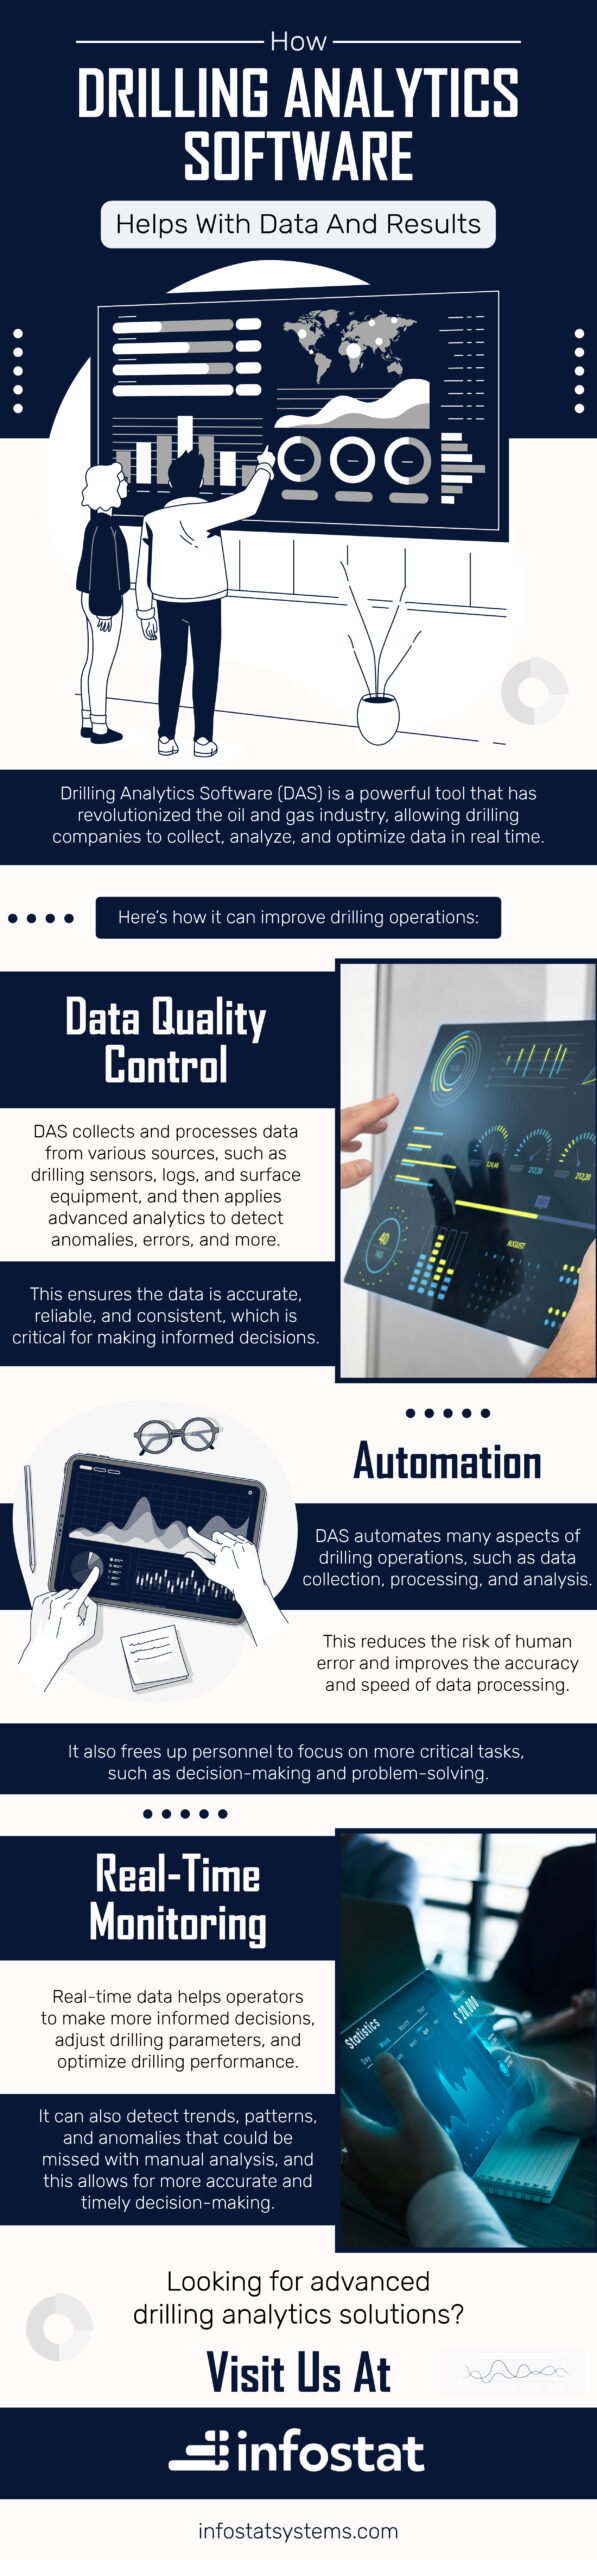 How Drilling Analytics Software Helps With Data And Results Infograph